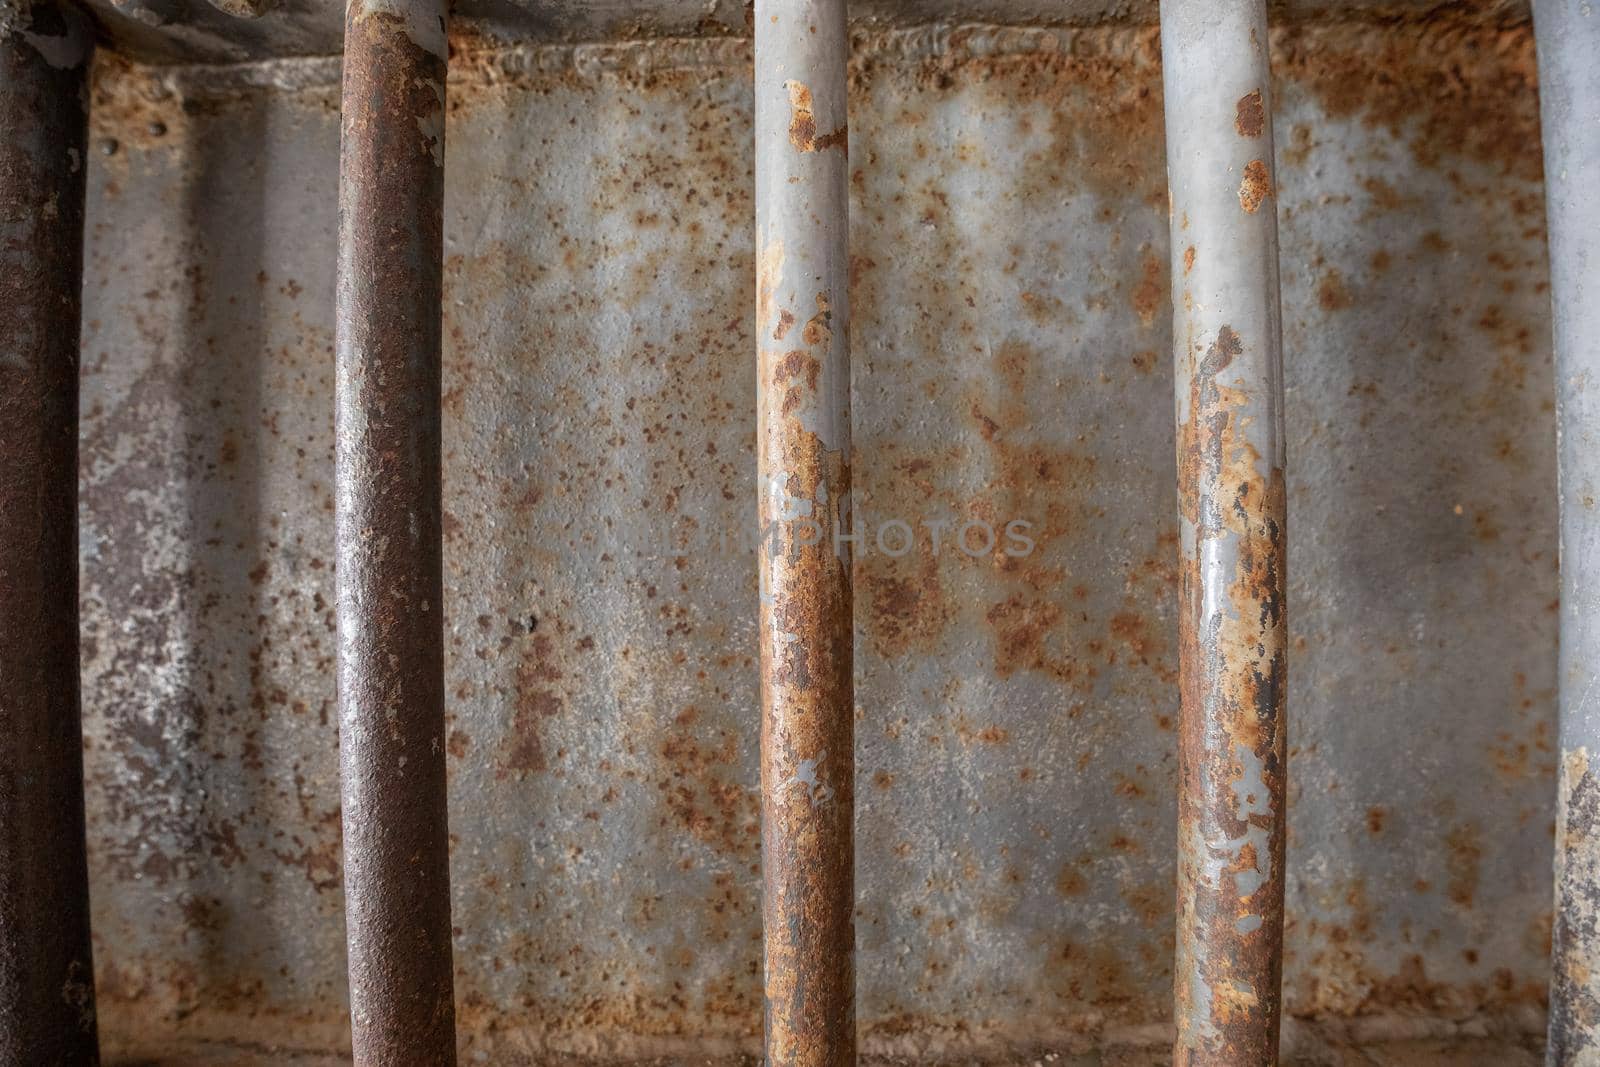 Rusted old iron bars designed to reinforce a door.